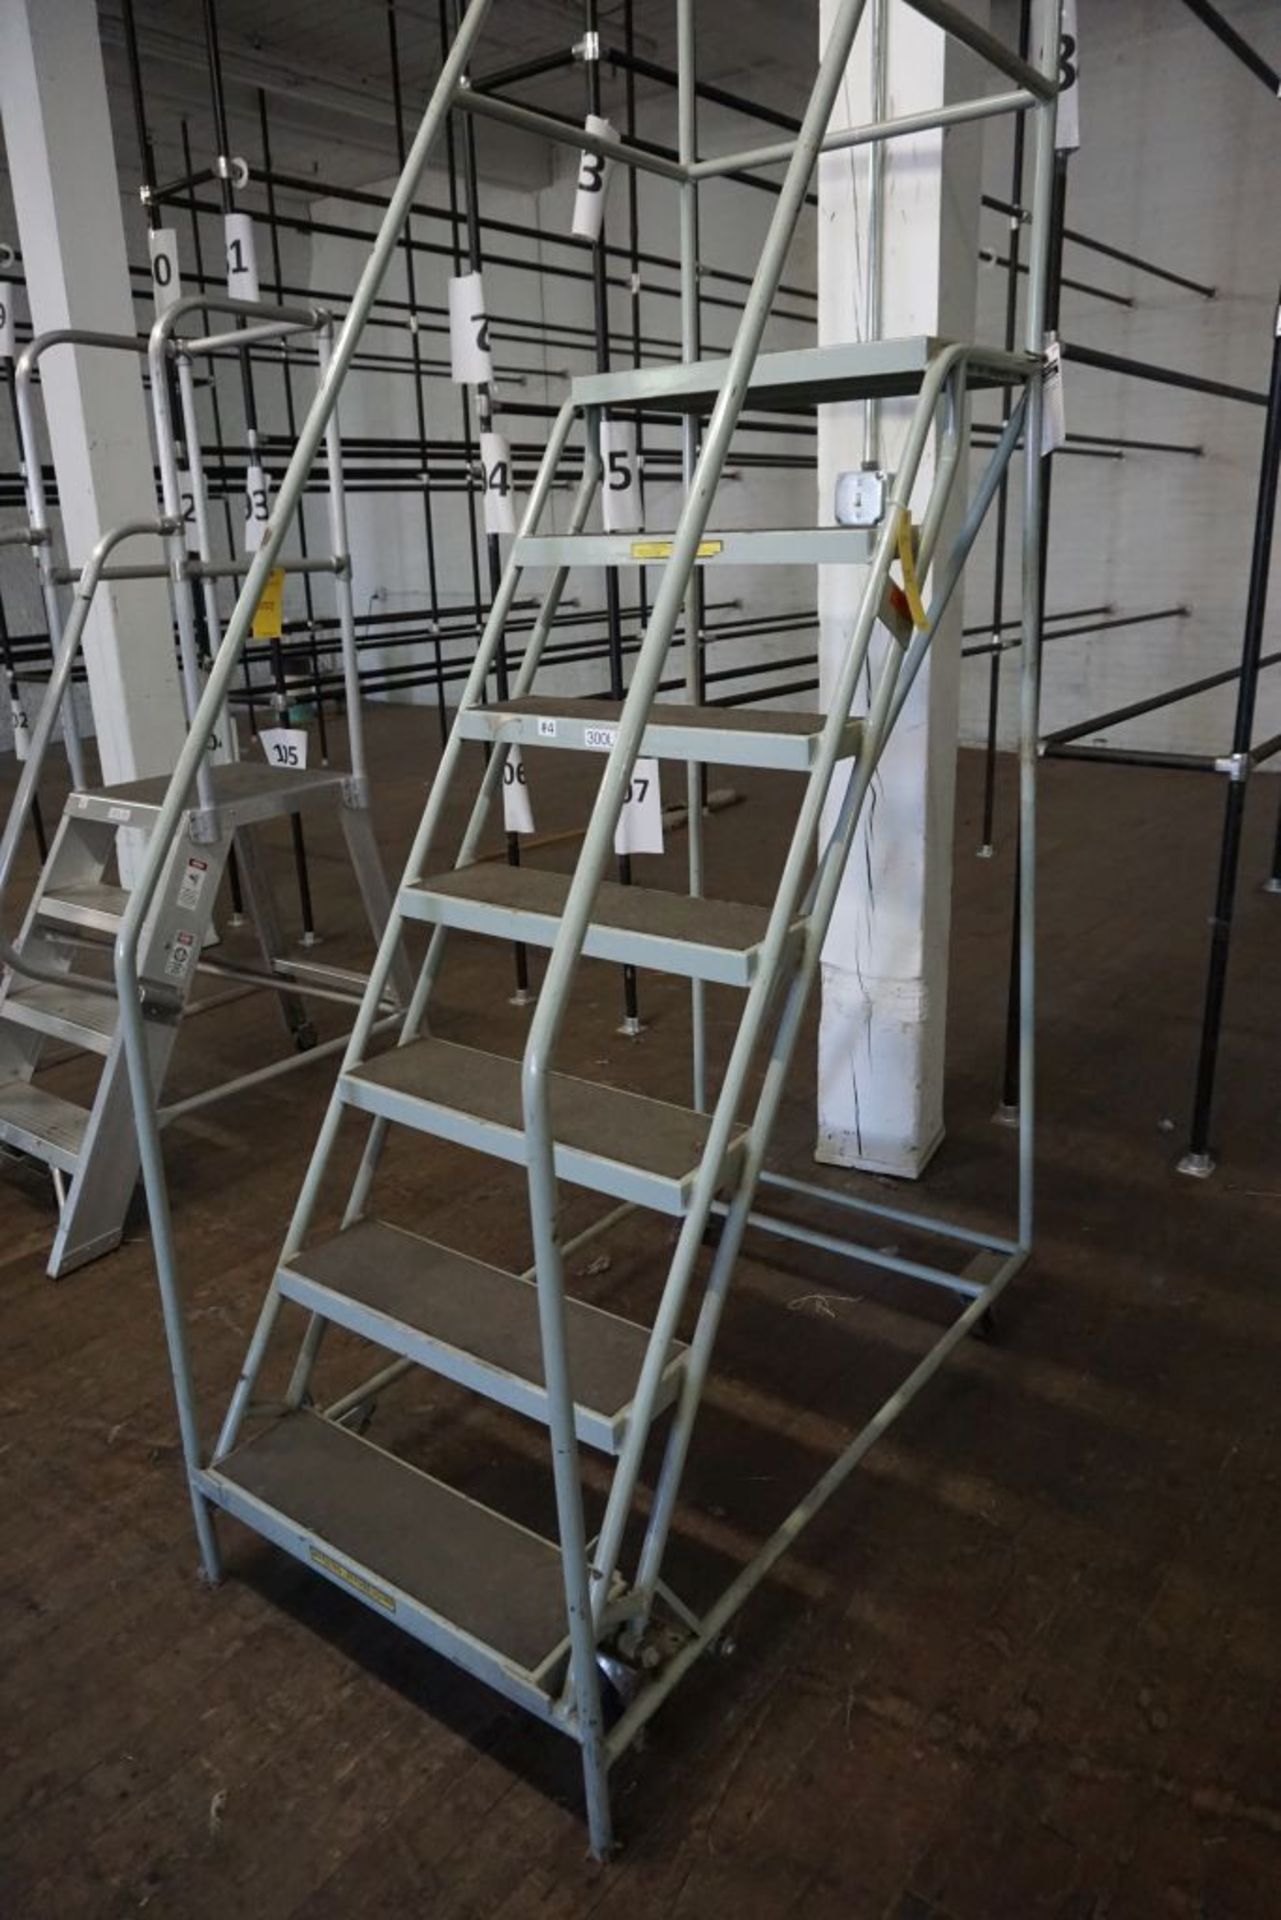 Portable Stairs|72" Platform Height|Lot Tag: 1051 - Image 2 of 3